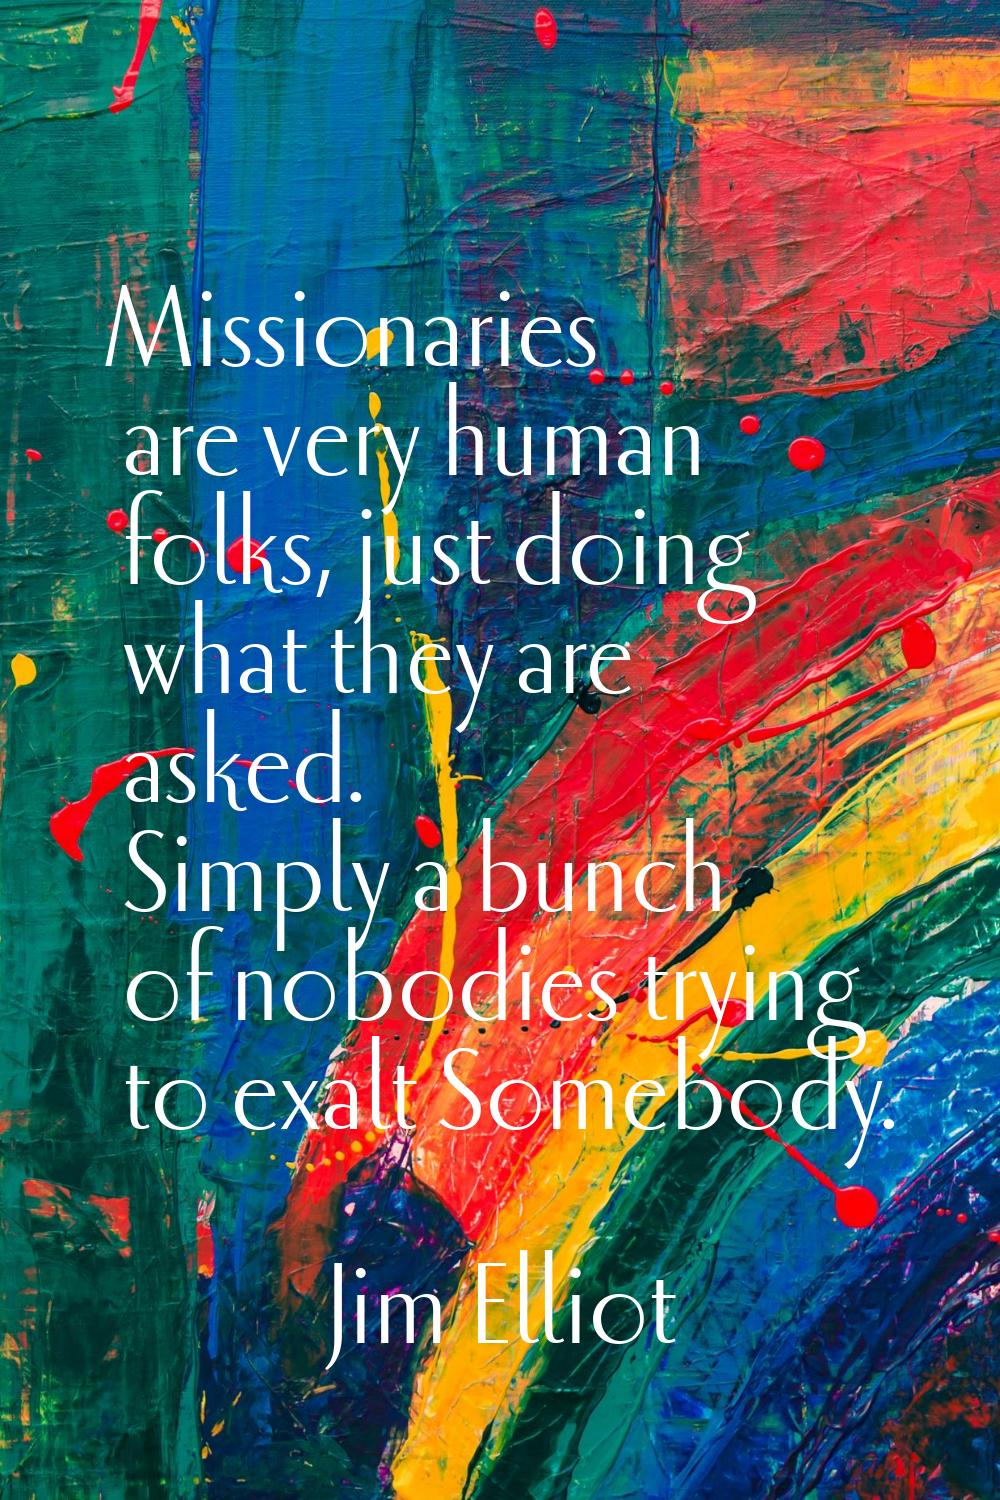 Missionaries are very human folks, just doing what they are asked. Simply a bunch of nobodies tryin